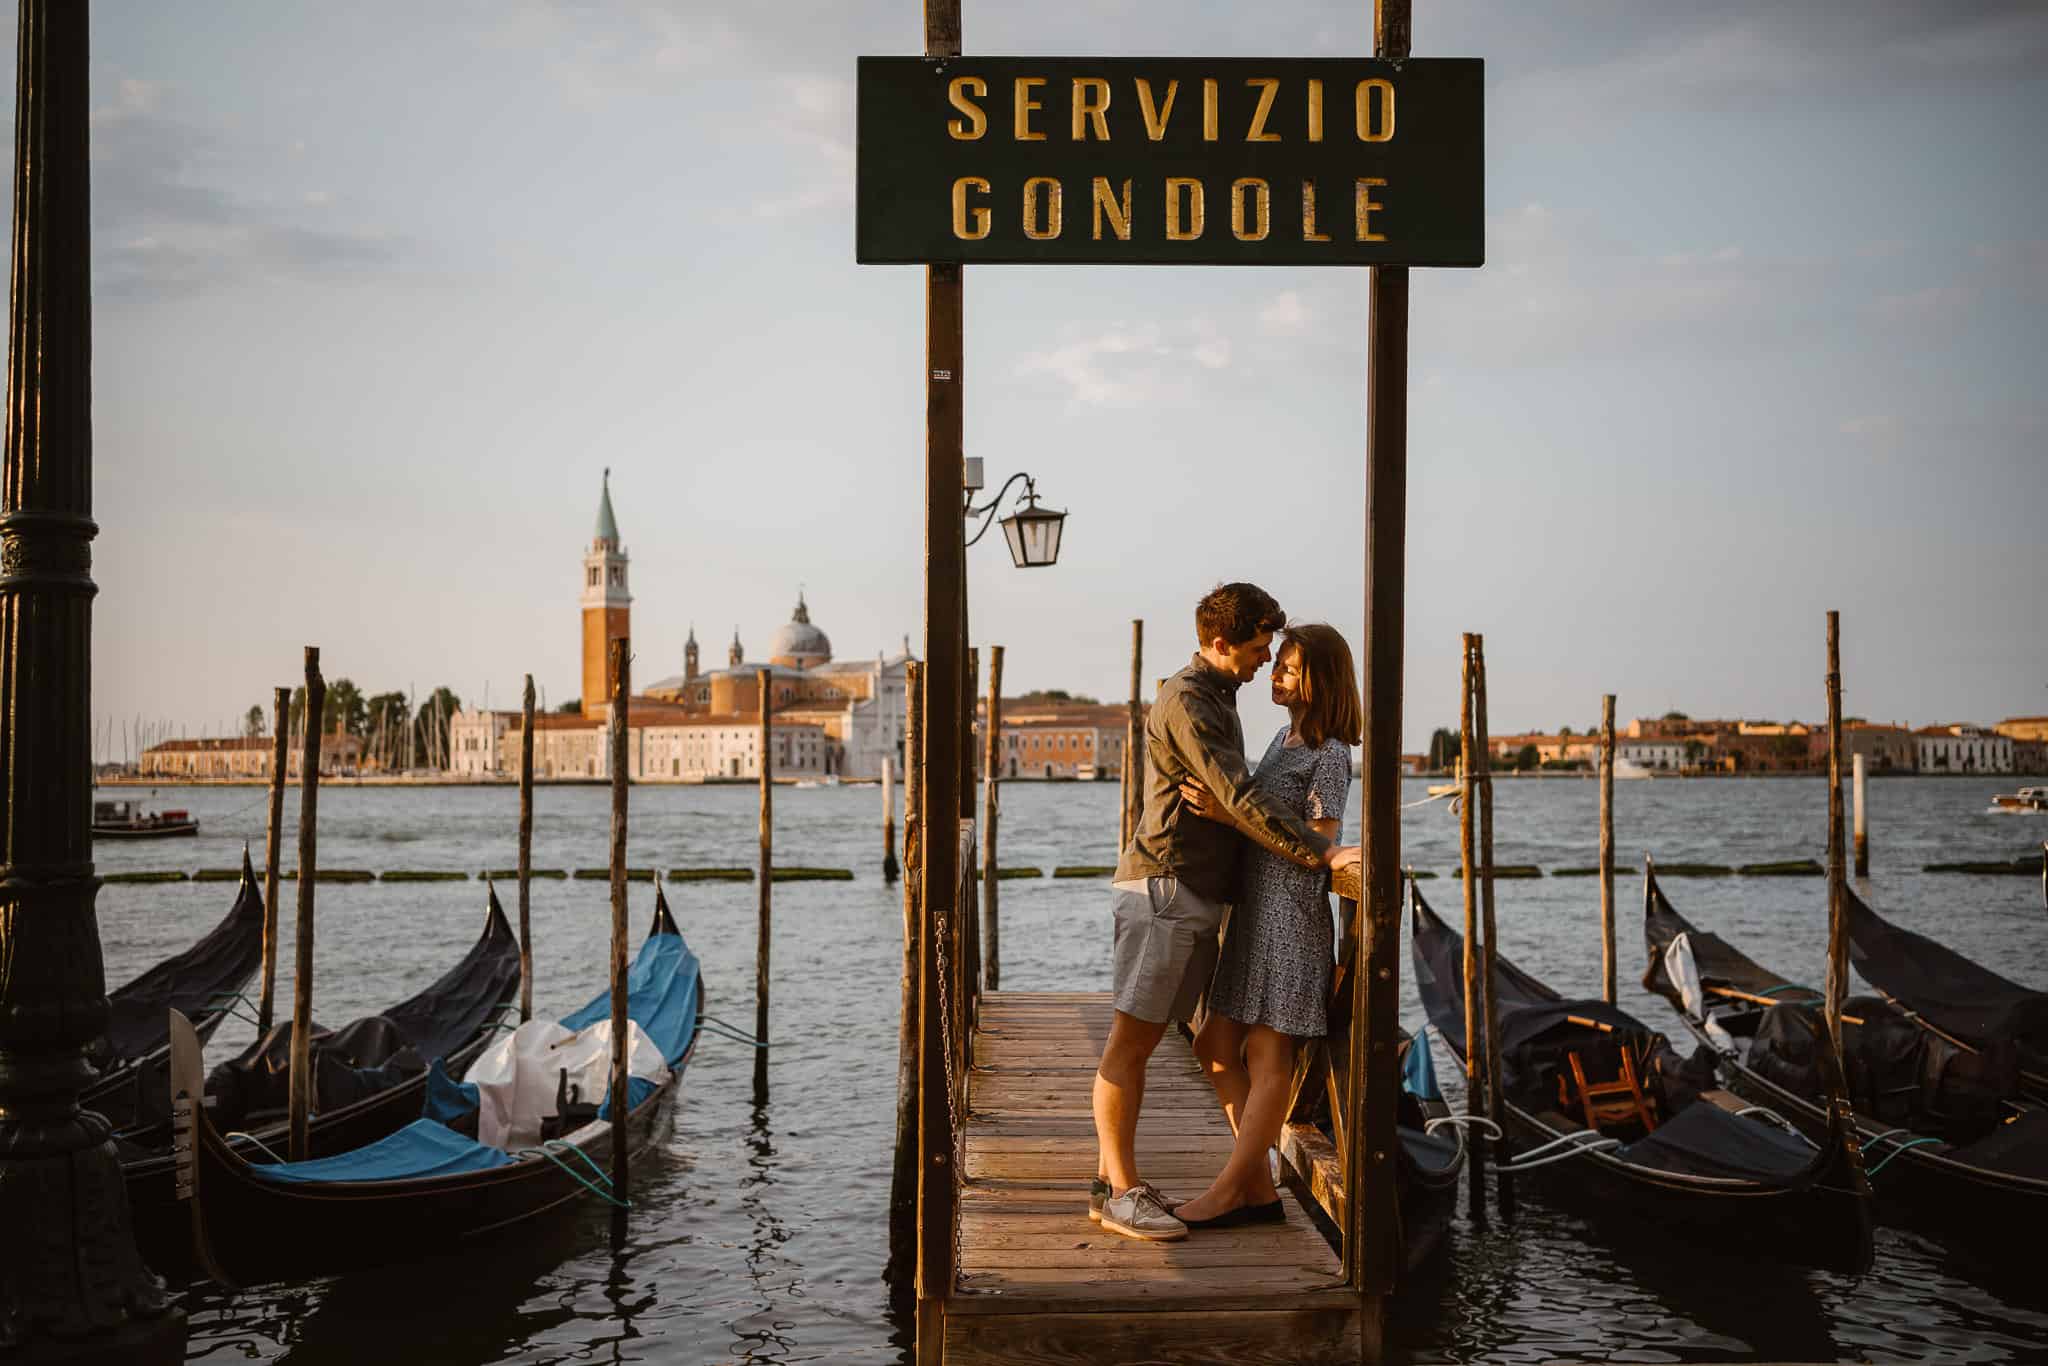 Engagement photo shoot in Venice by engagement photographers Ludovica lanzafami and Valerio Elia